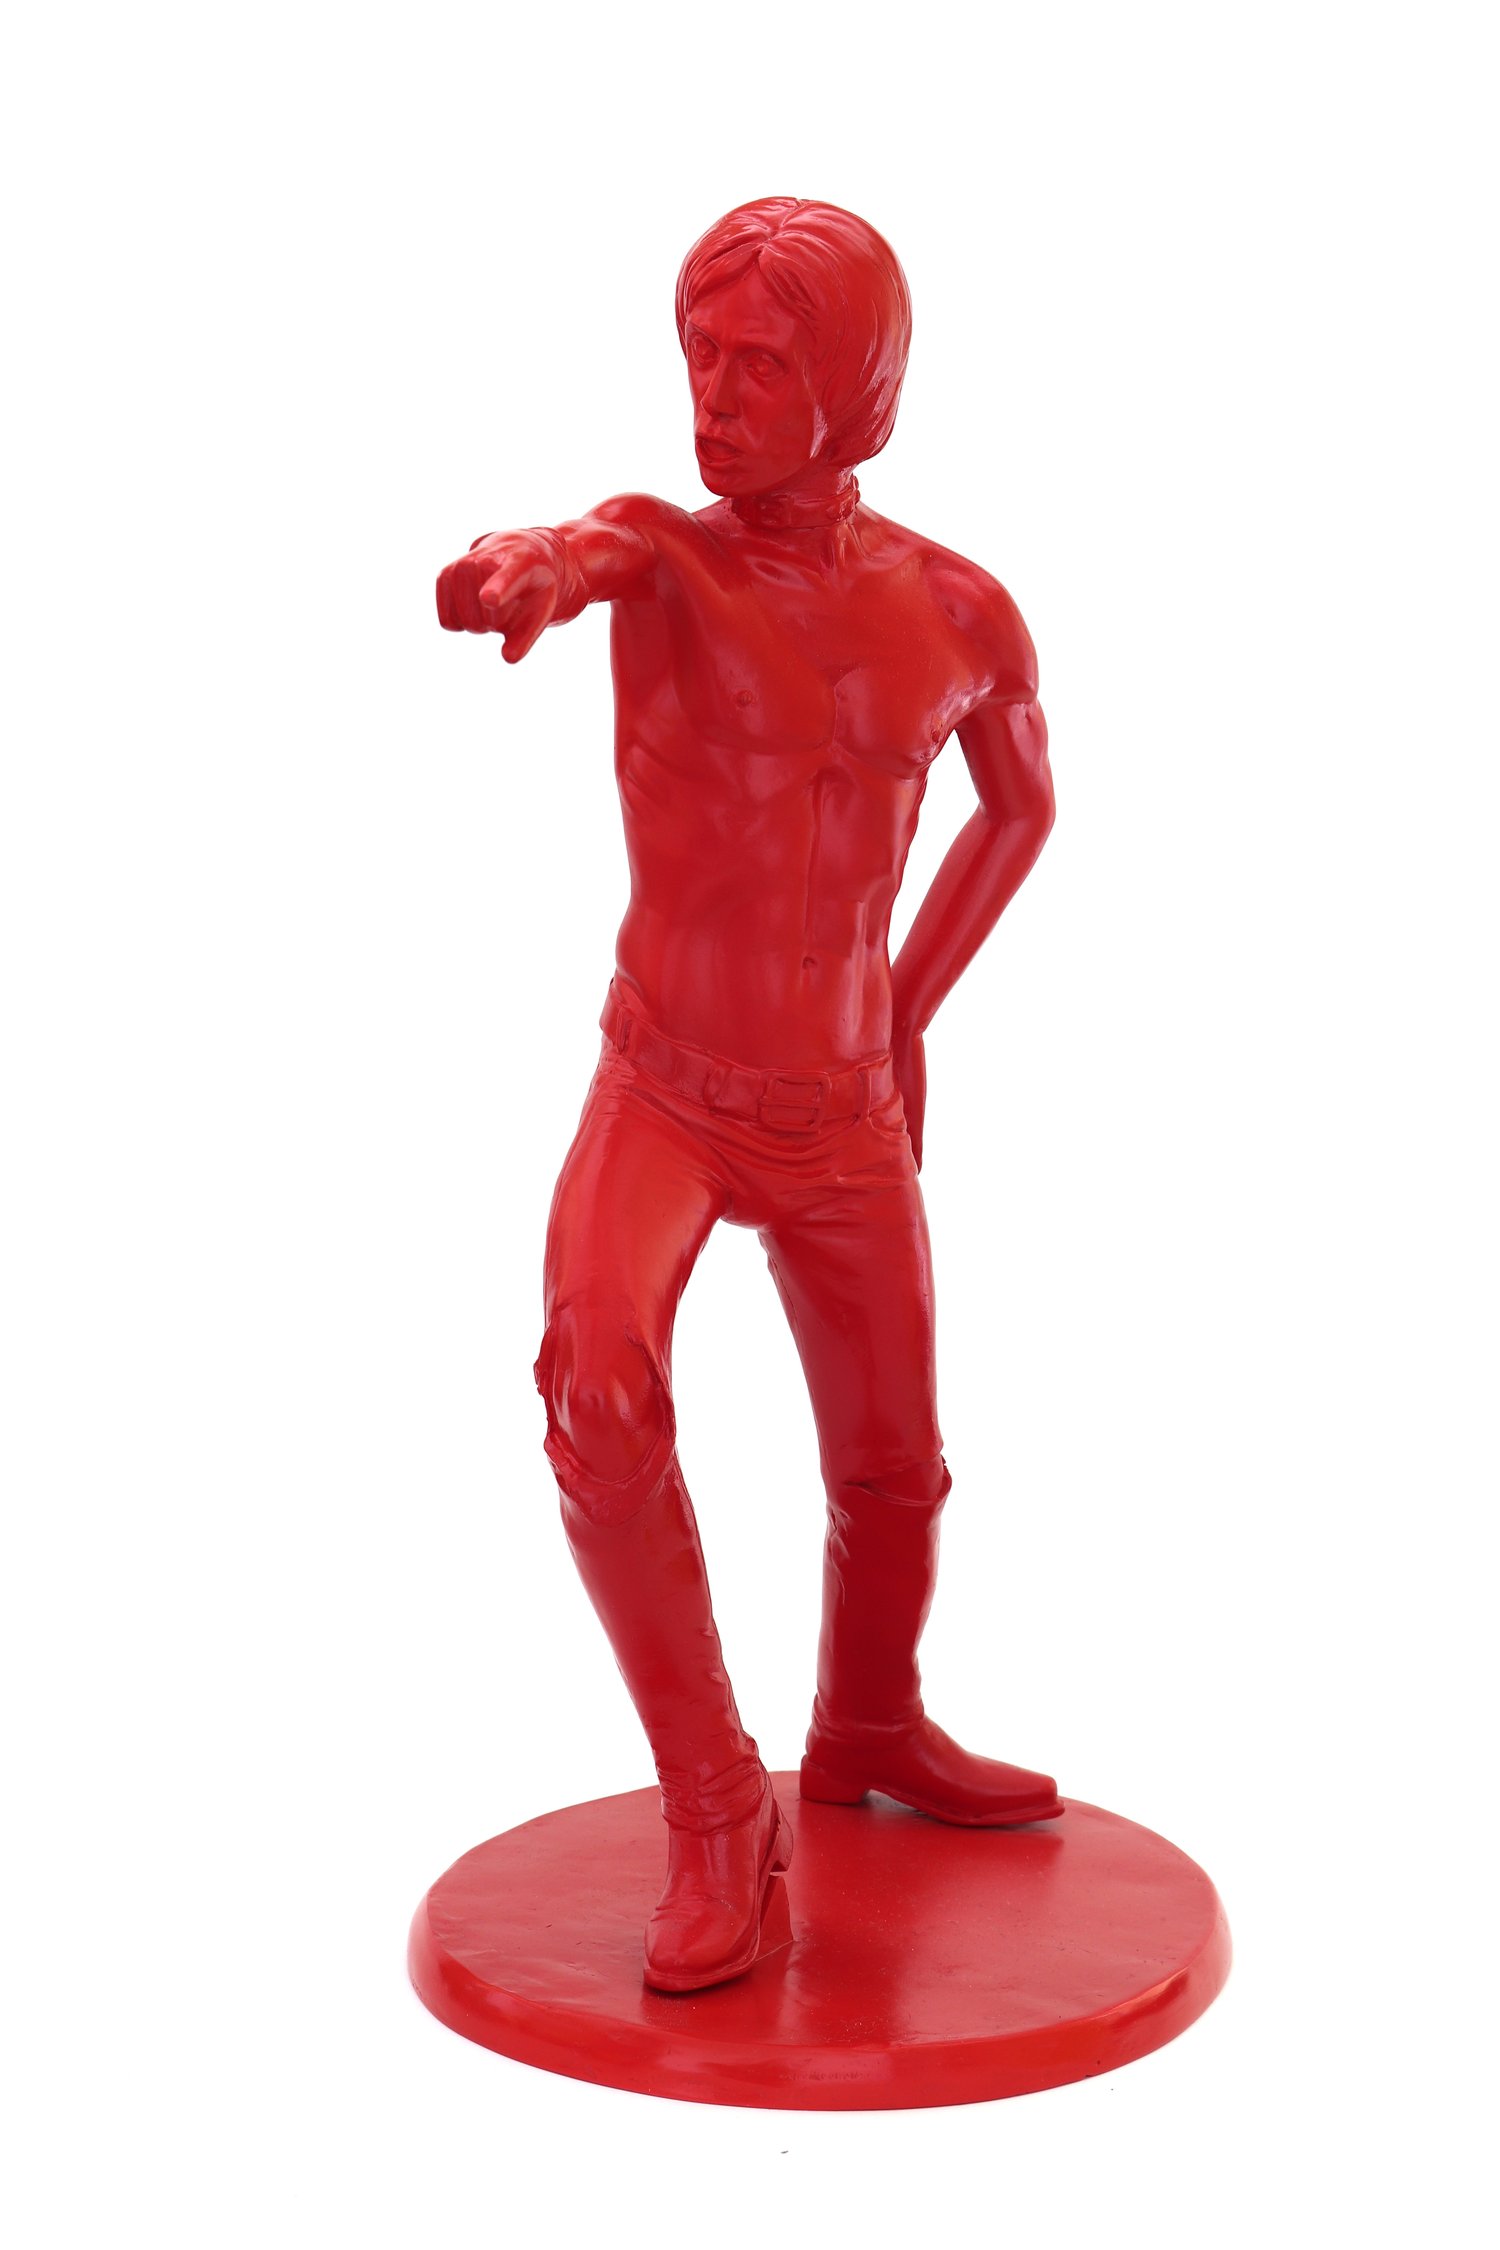 Image of IGGY POP (RED EDITION) FREE SHIPPING PROMOTION